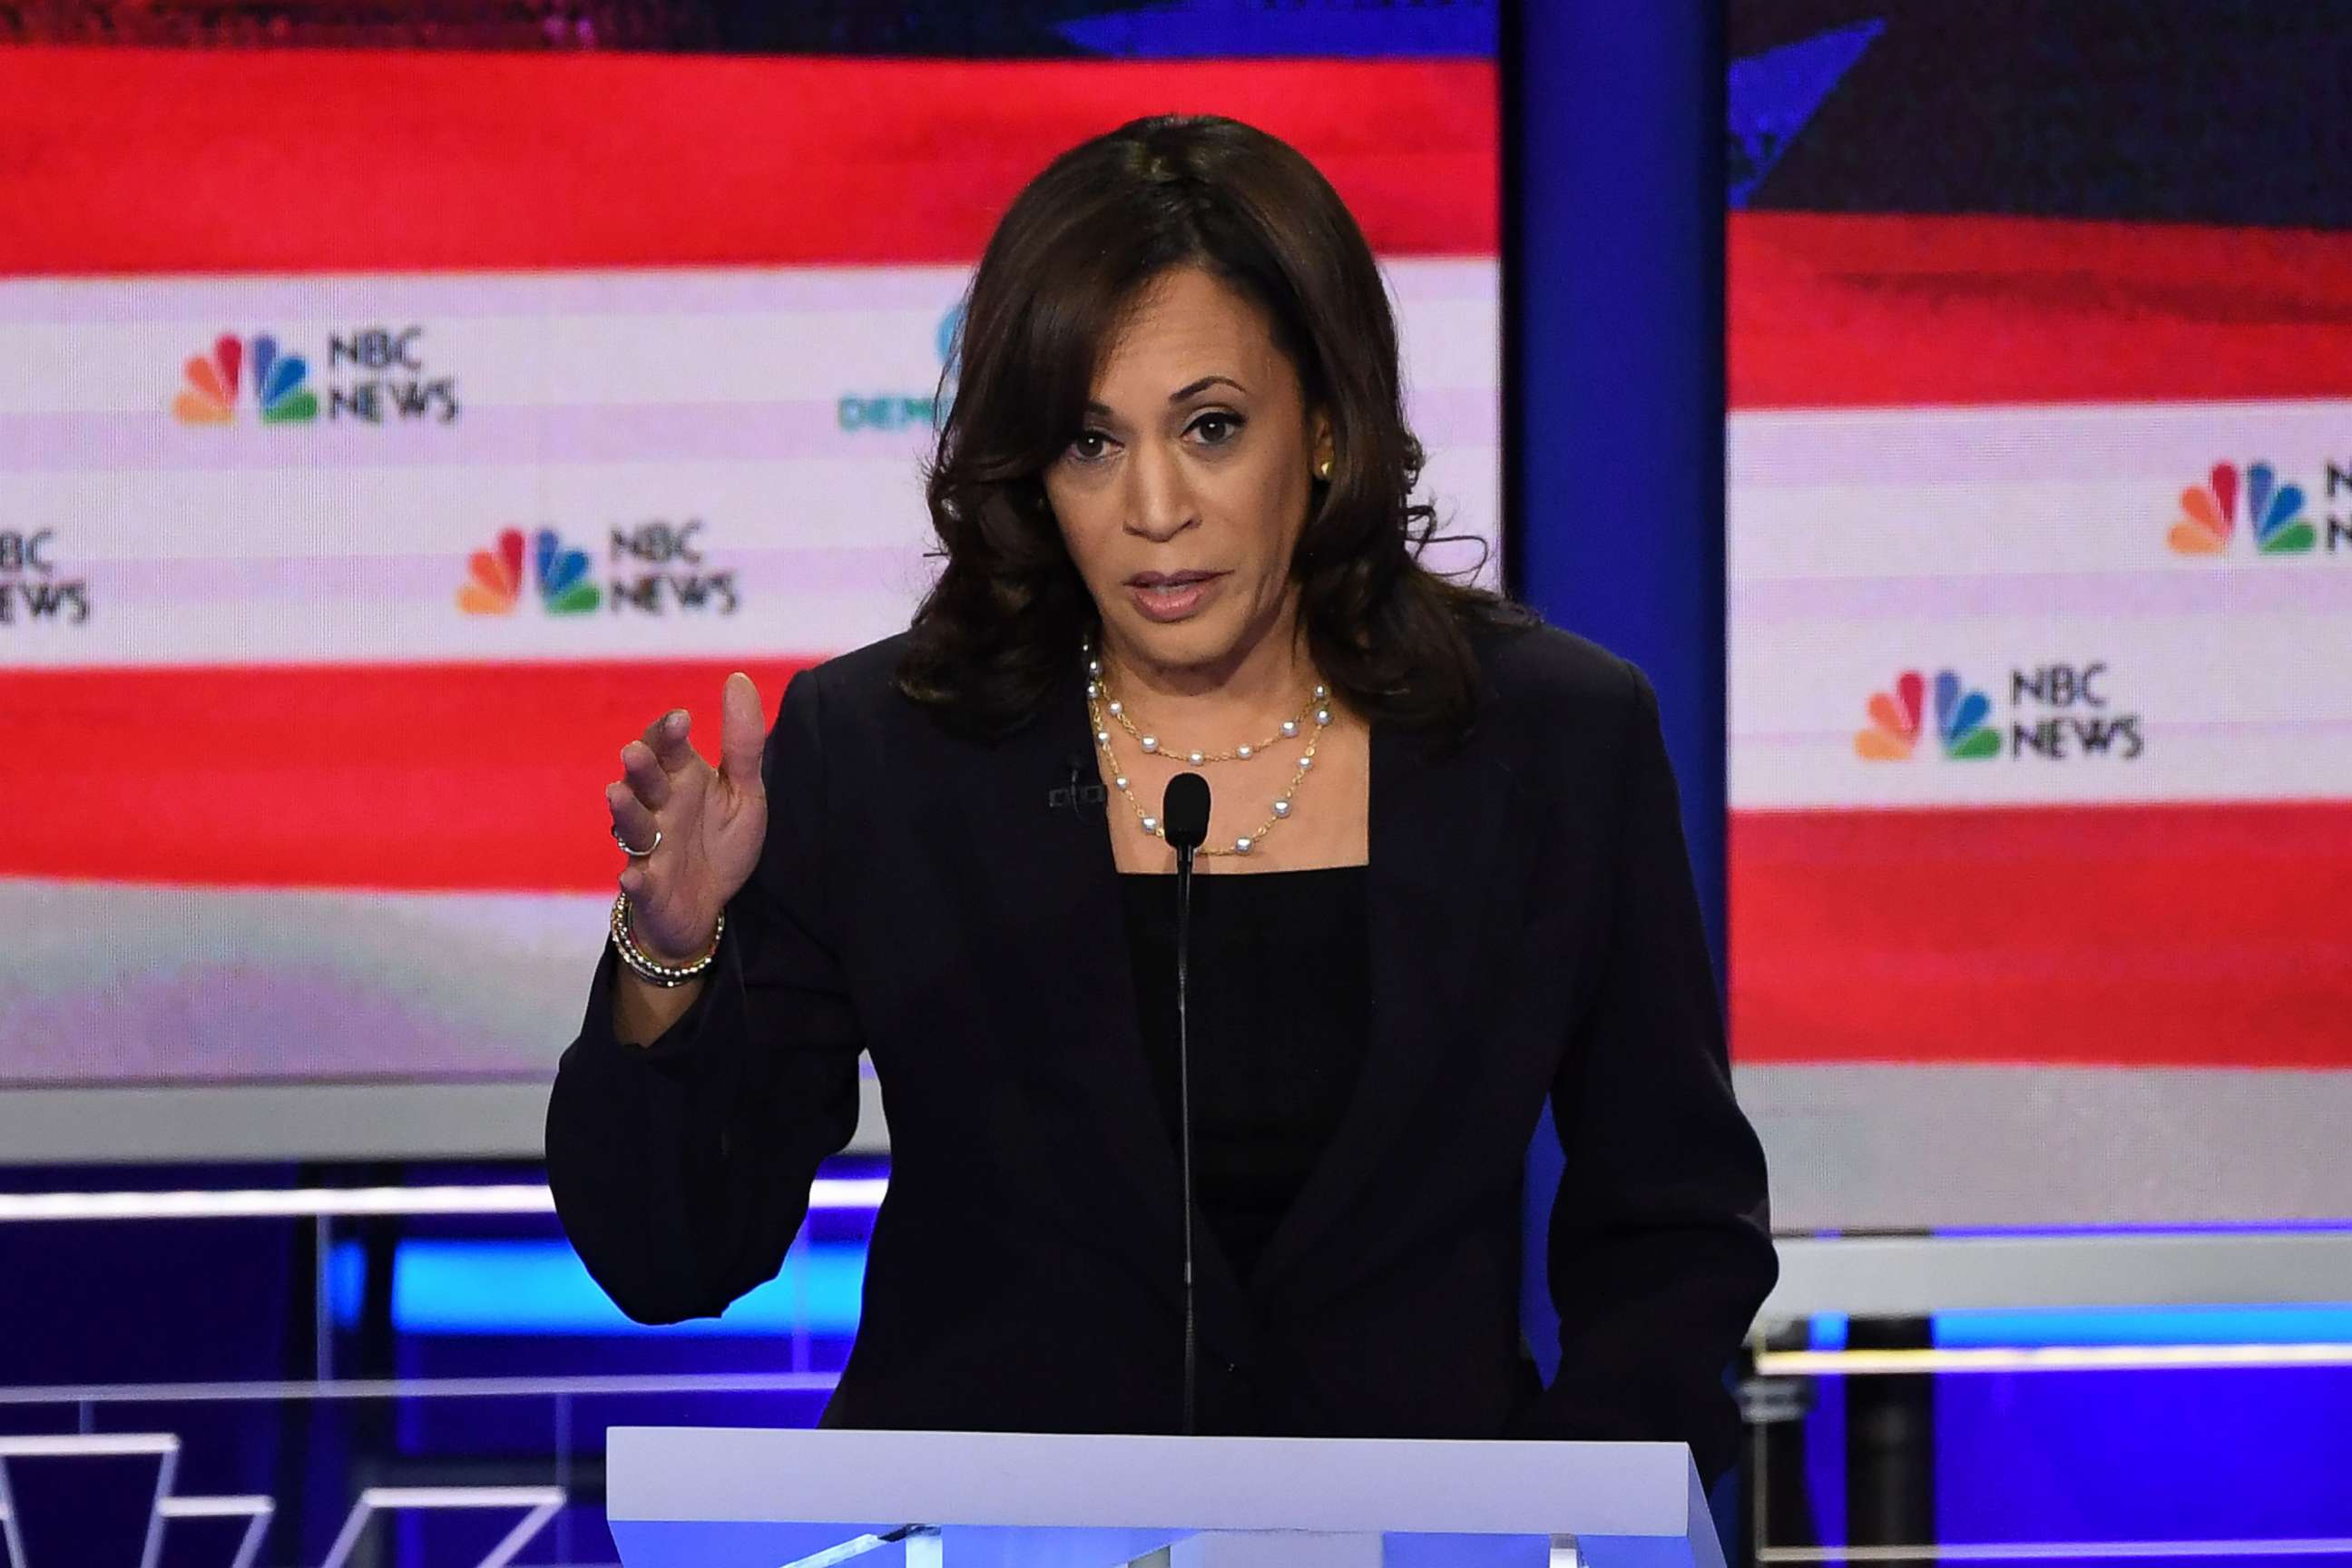 PHOTO: Kamala Harris participates in the second night of the first 2020 democratic presidential debate at the Adrienne Arsht Center for the Performing Arts in Miami, June 27, 2019.